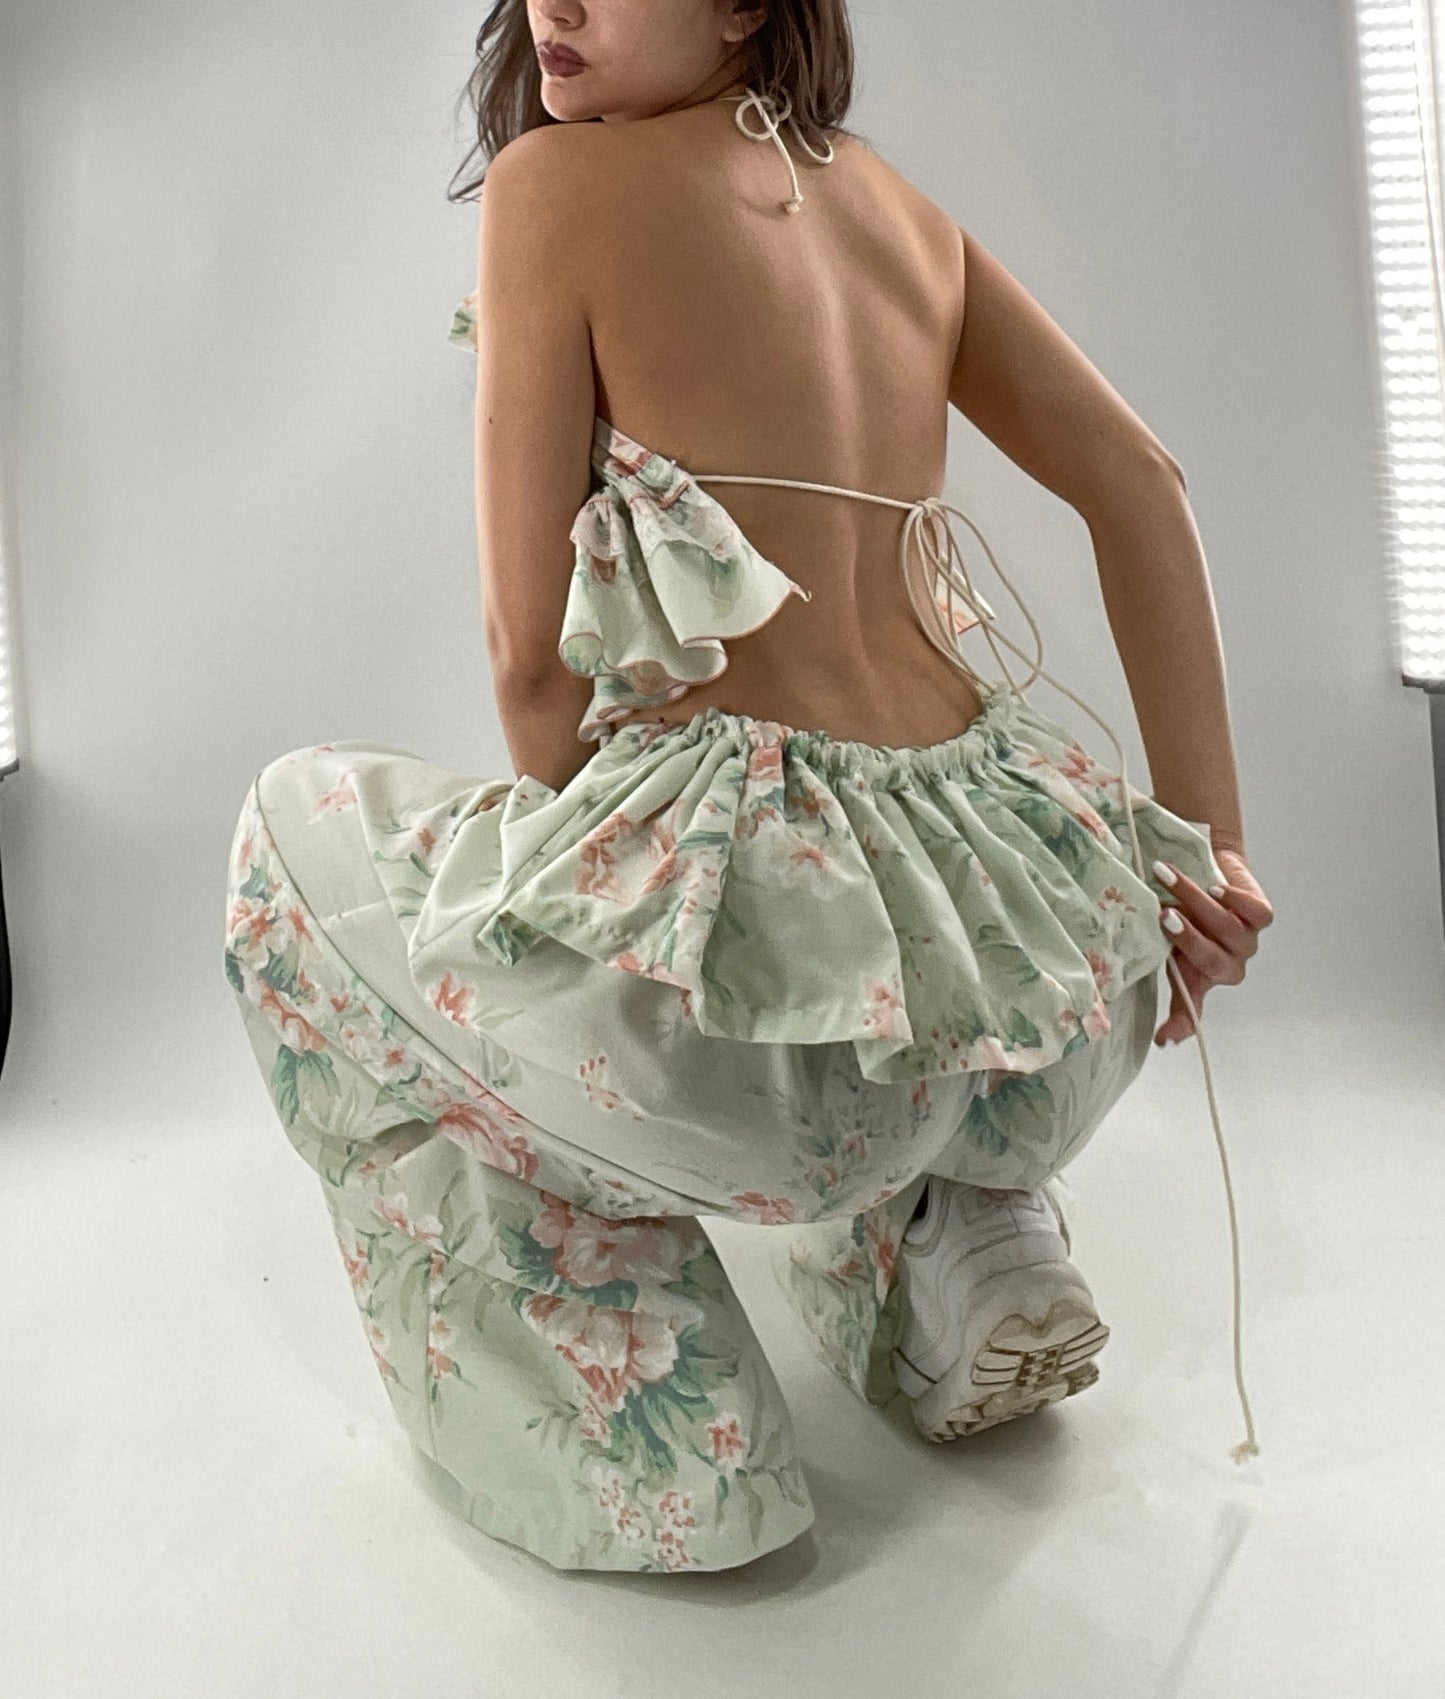 Vintage Set Covered in Delicate Dainty Florals, Butterflies, and Ruffles (One Size, Adjustable)